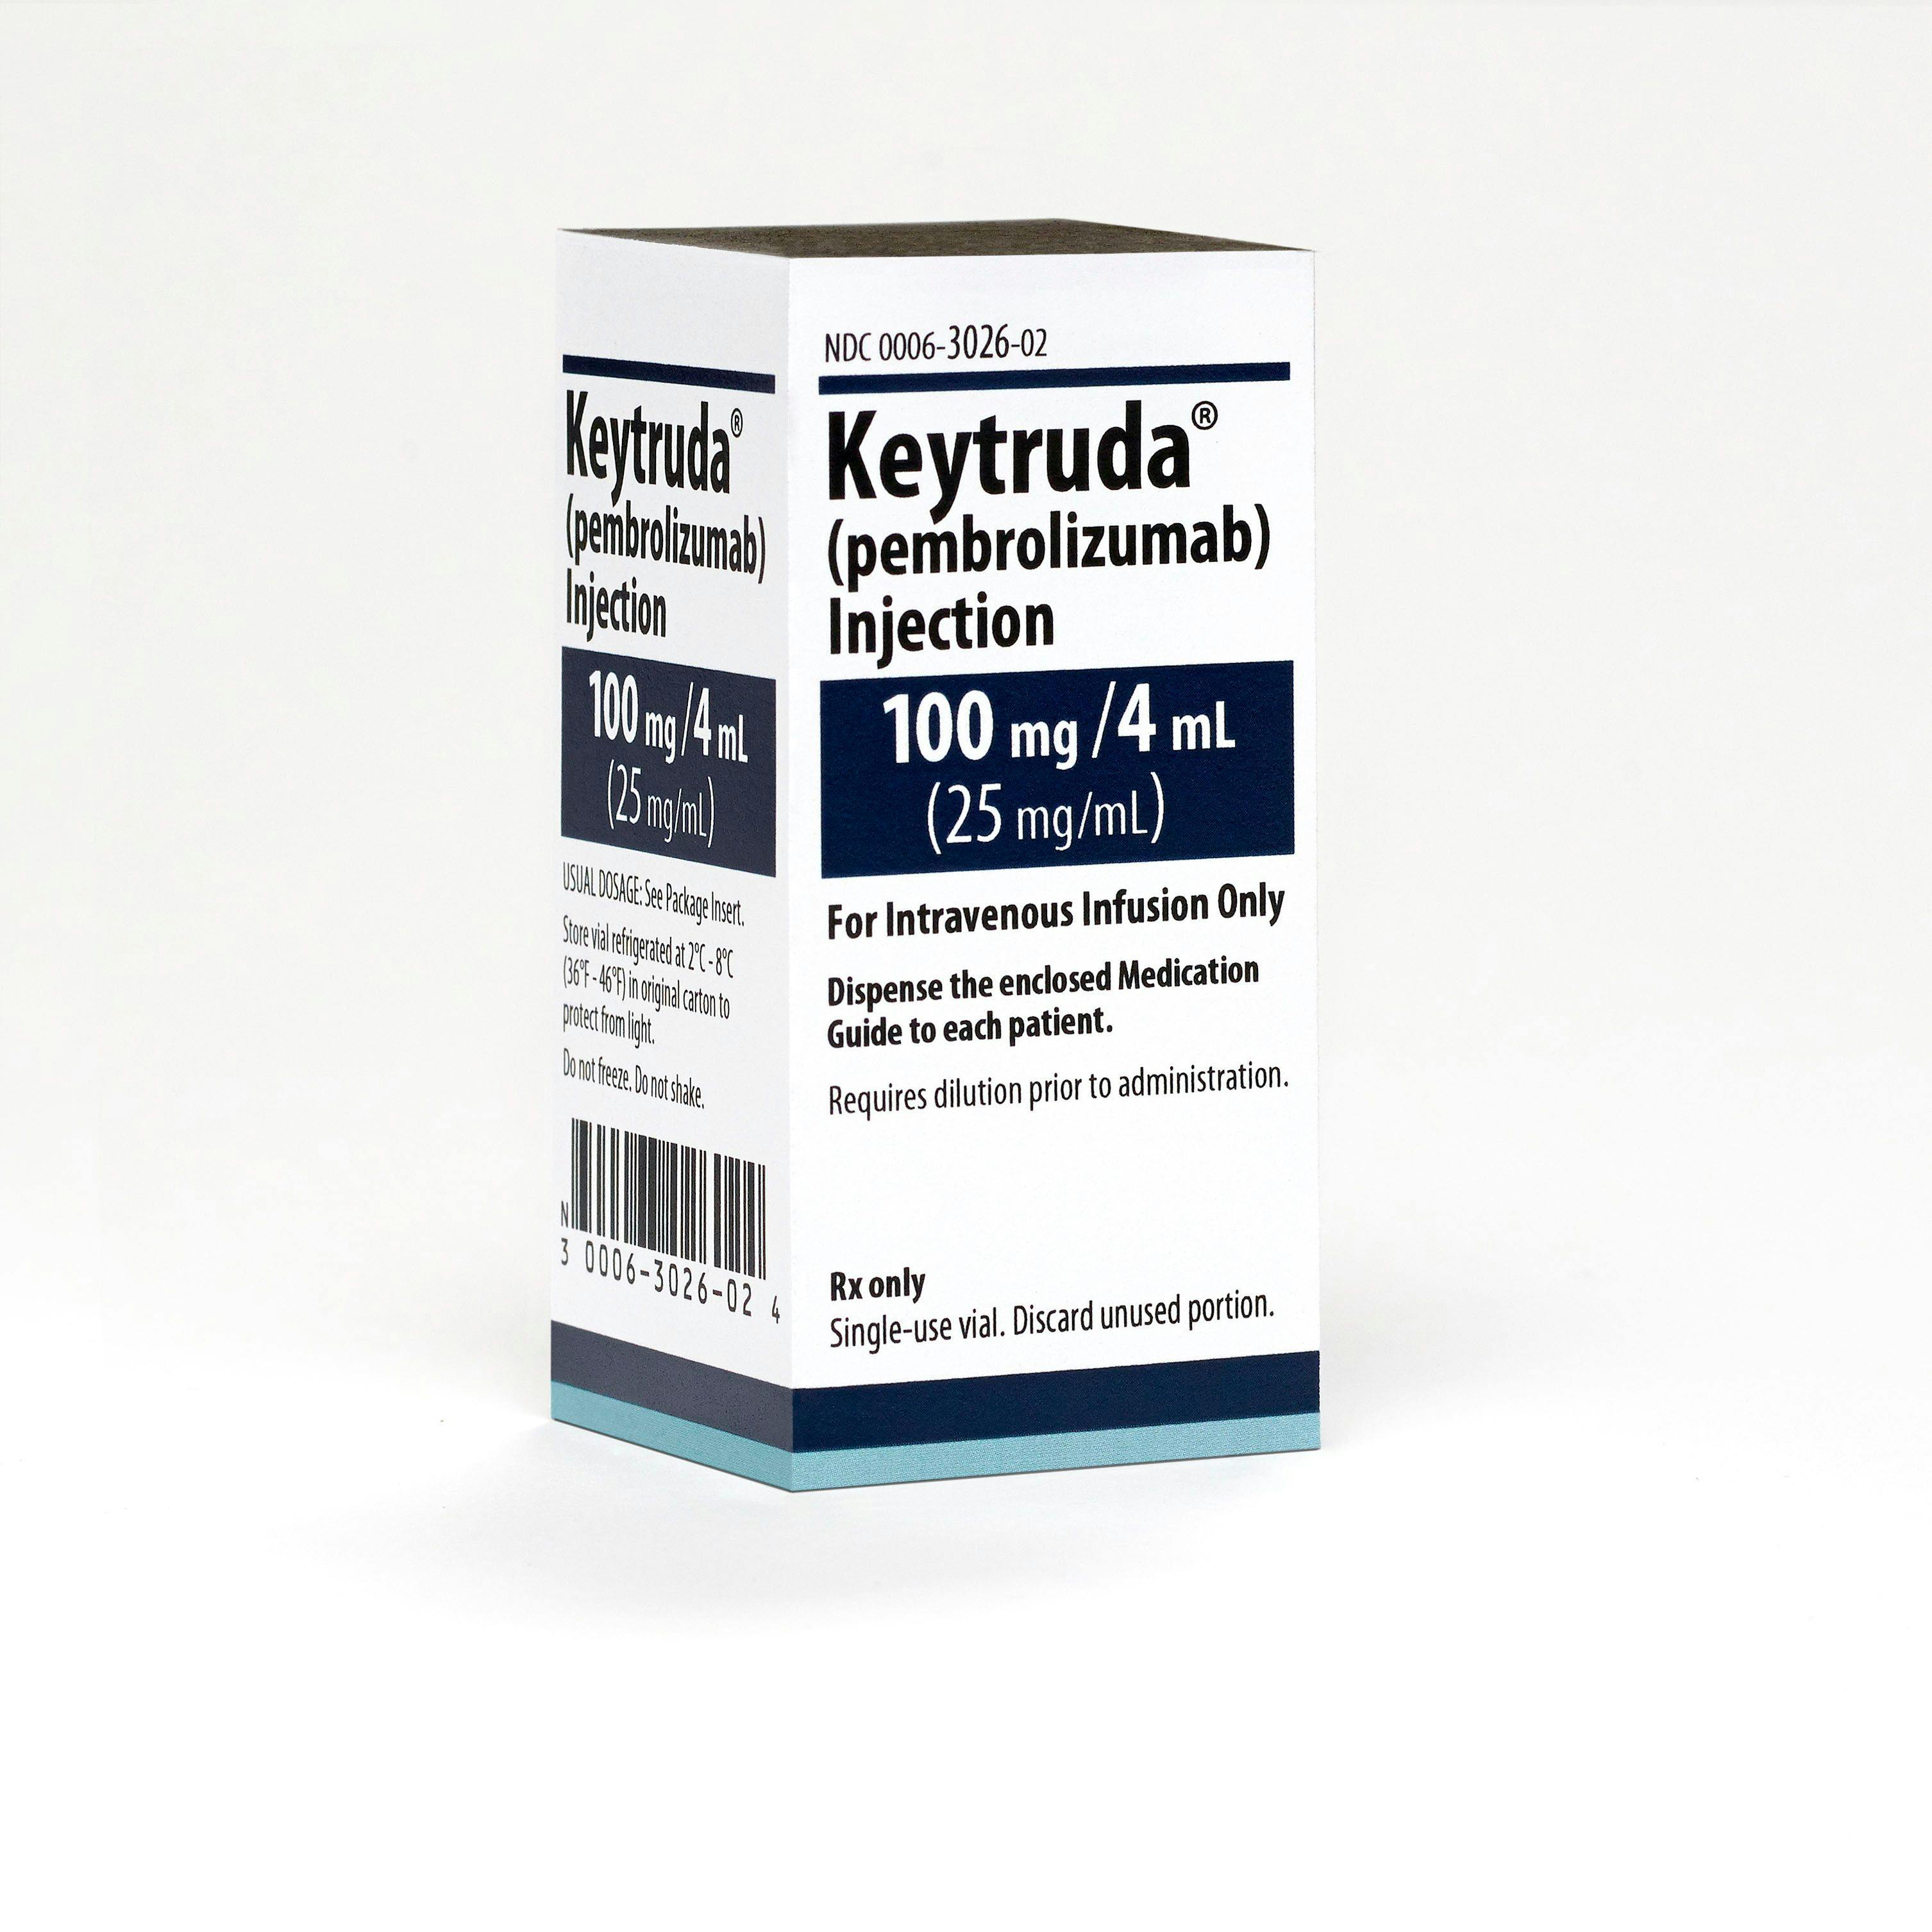 Keytruda Approved for Early Treatment of Colorectal Cancer in Patients With Genetic Mutations